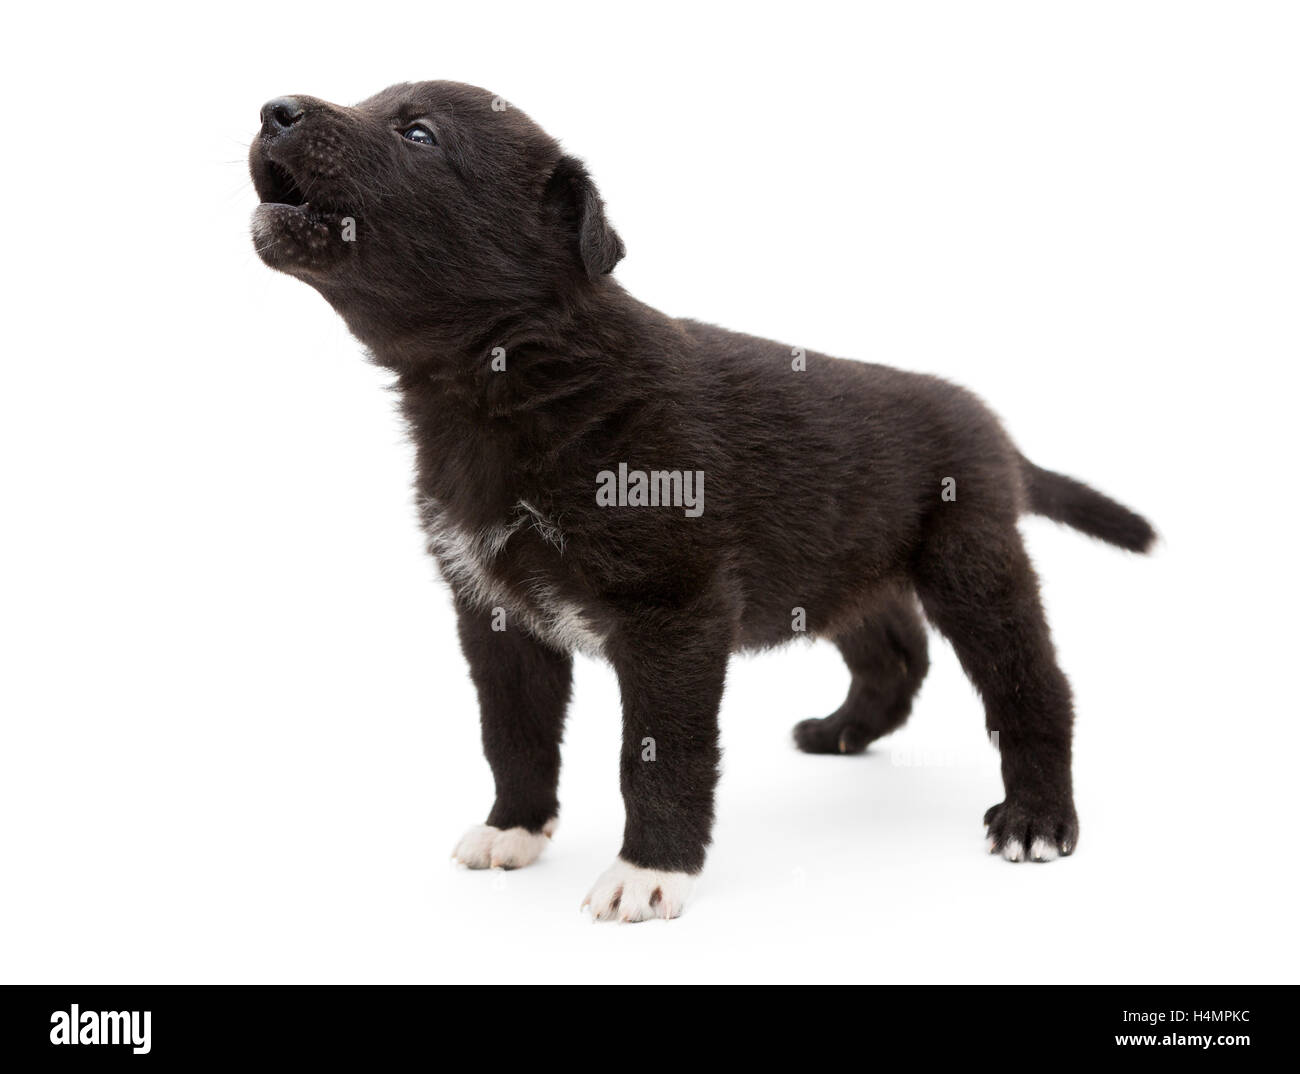 Small, black puppy cries and howls, isolated on white Stock Photo